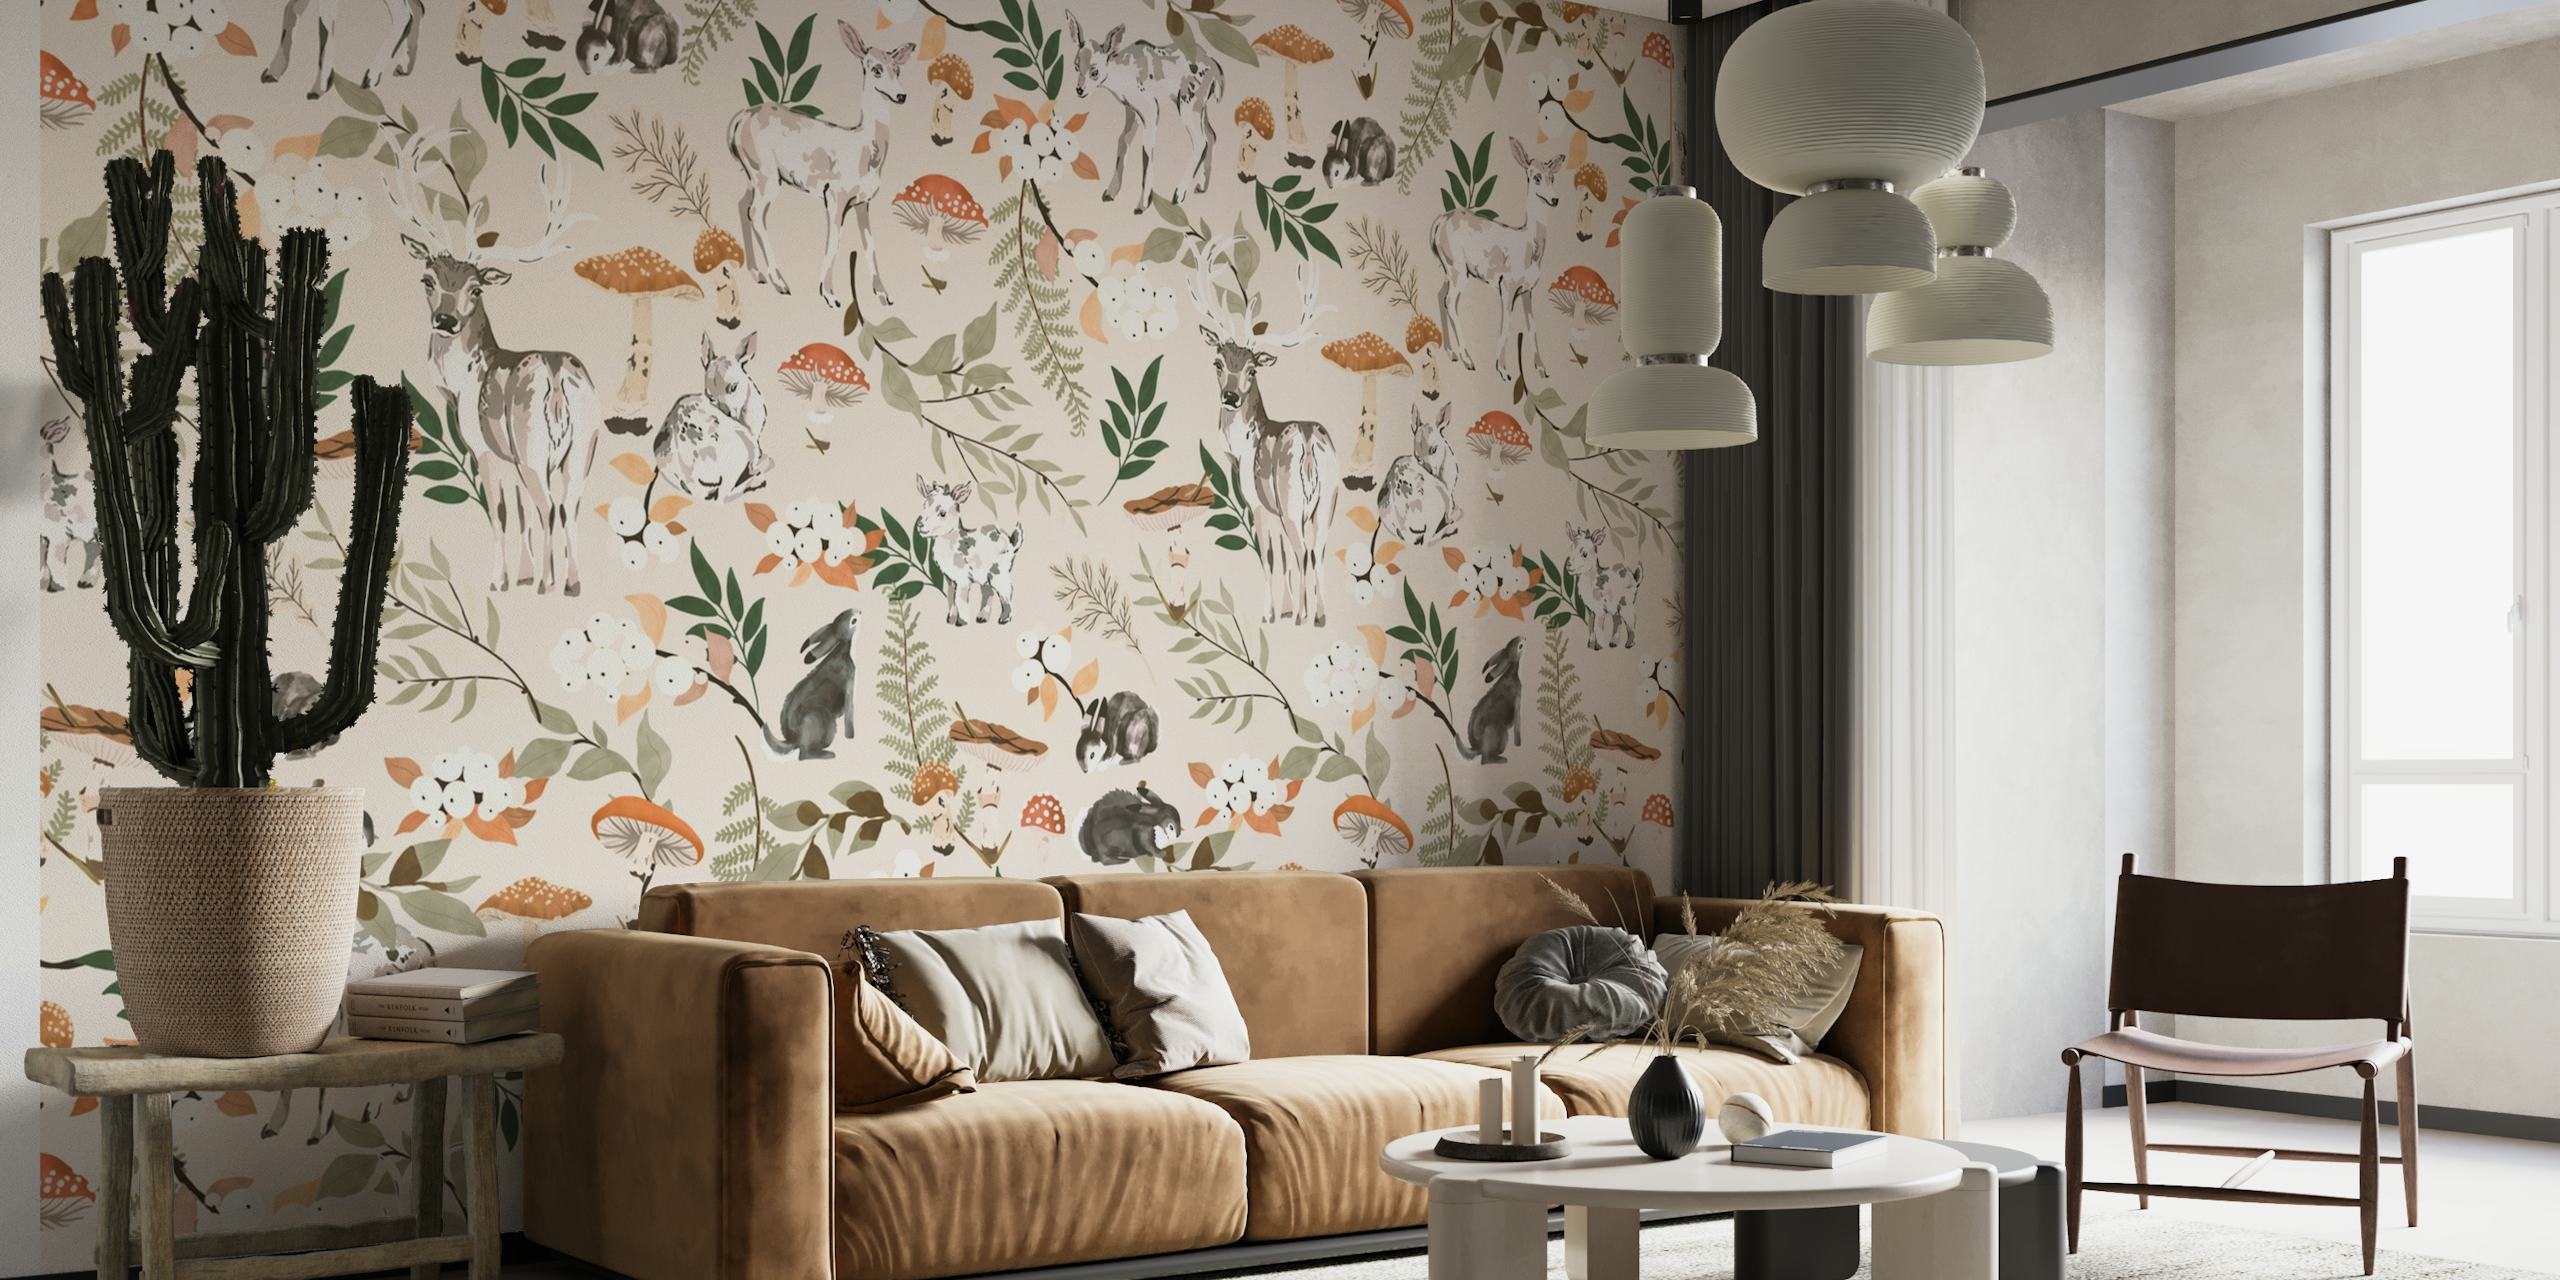 Illustration of forest animals and autumn flora on a wall mural